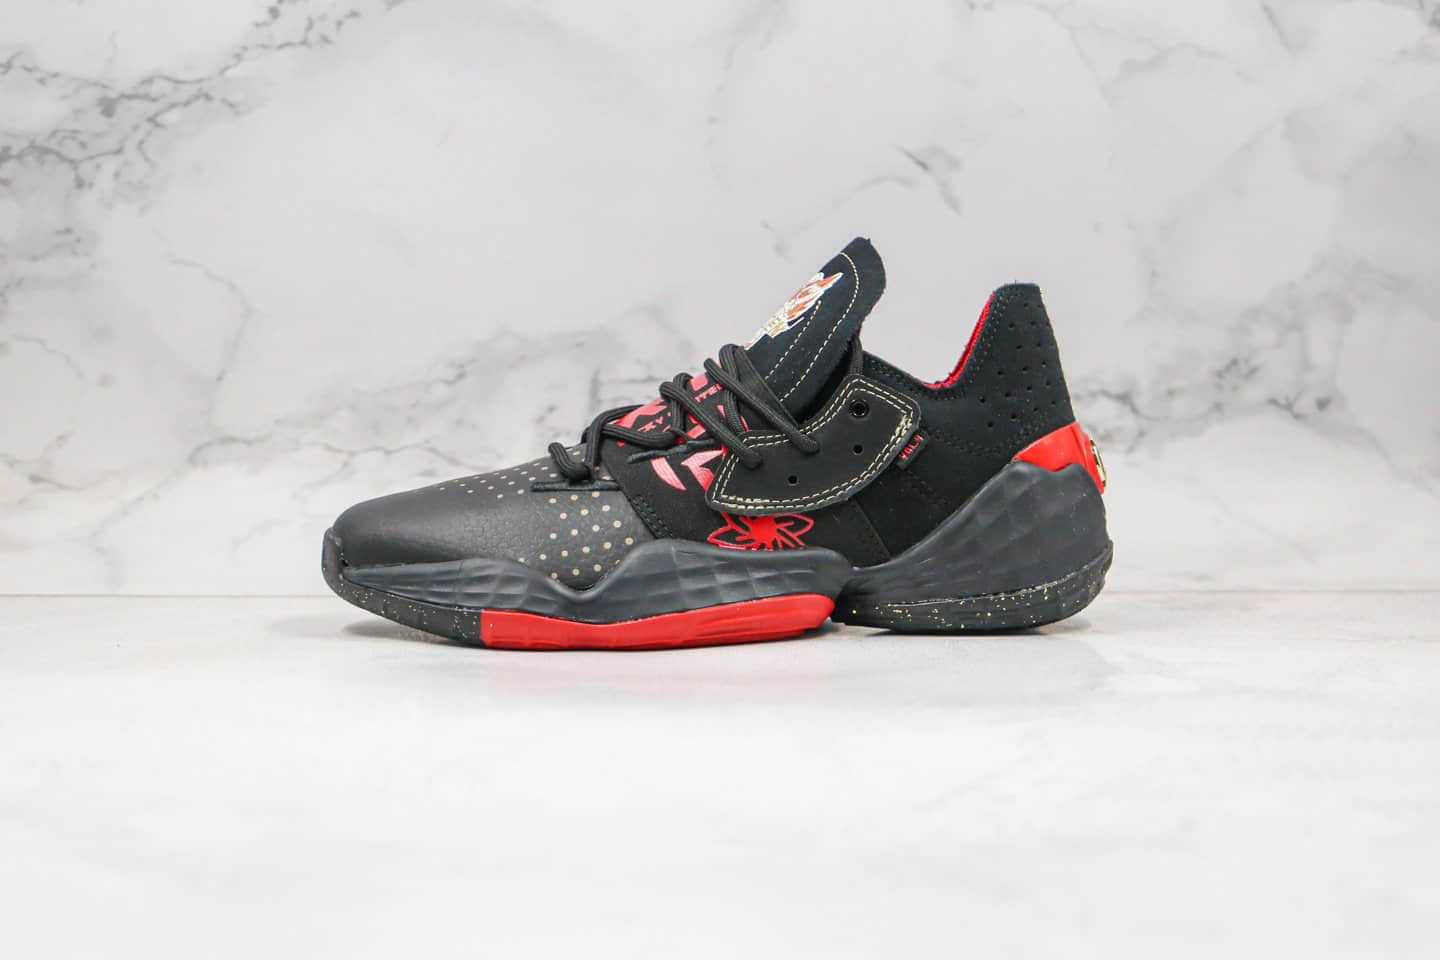 Adidas Harden Vol. 4 'Chinese New Year' EF9940 - Limited Edition Basketball Shoes